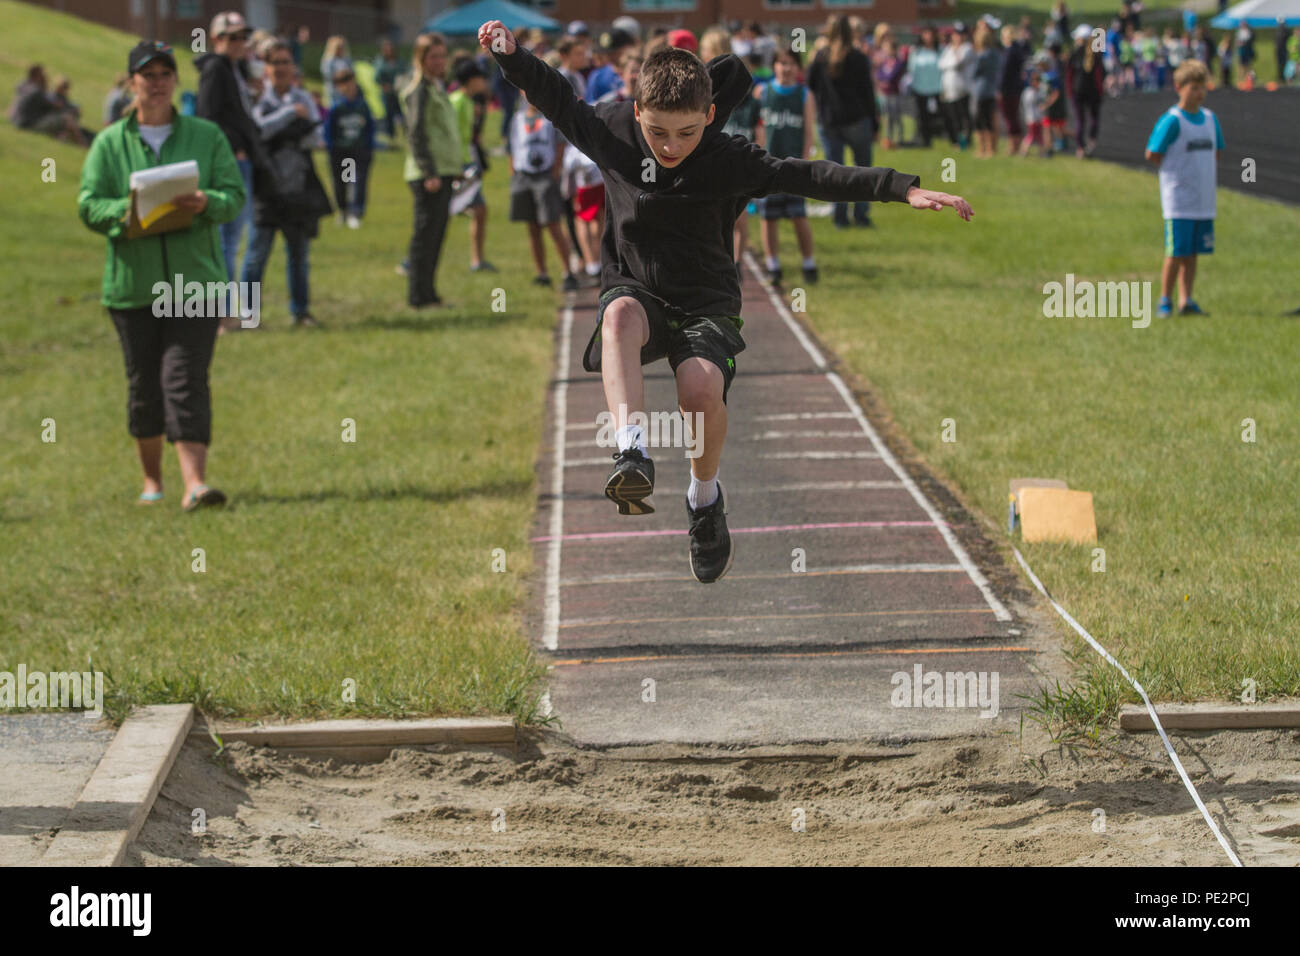 Young boy competing in track & field's  trple jump, wearing hoodie and shorts. Caught in mid air. Model released Stock Photo